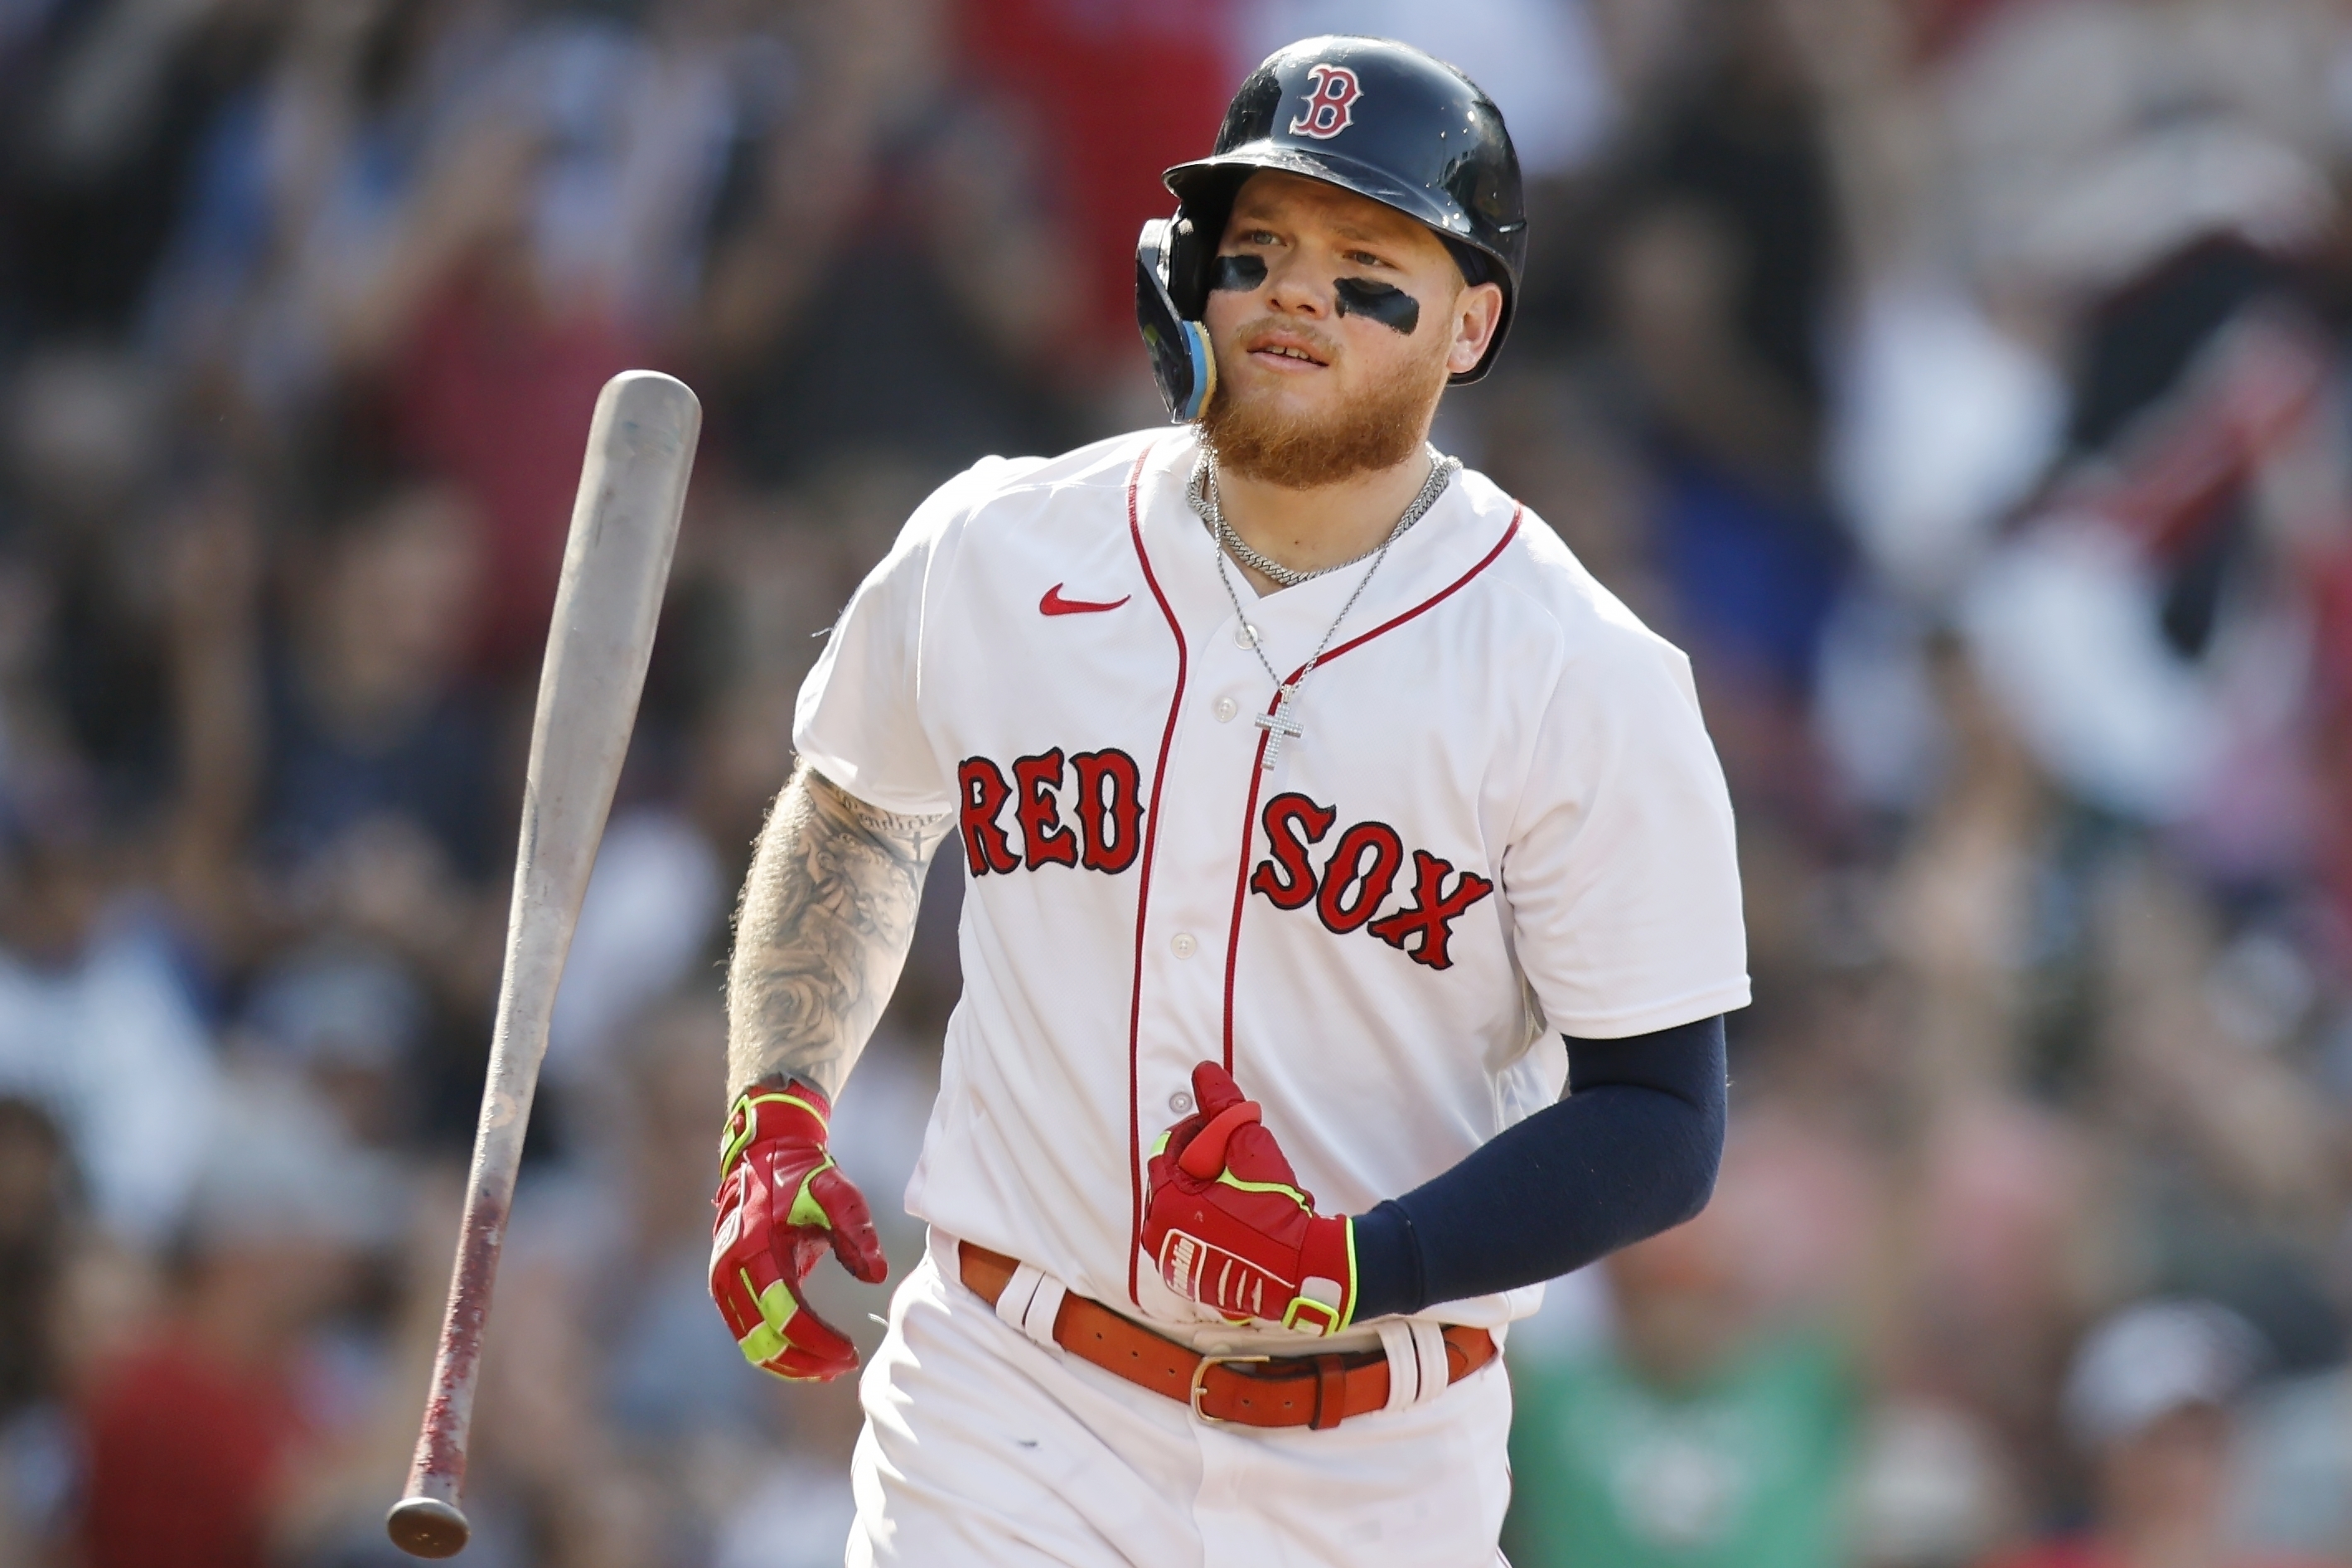 In rare Yankees-Red Sox trade, outfielder Verdugo goes to New York